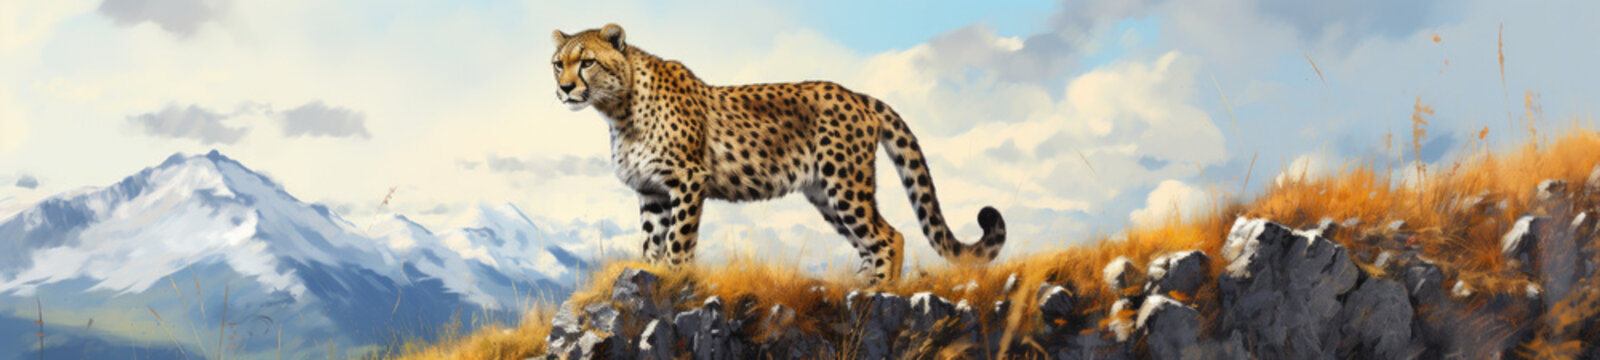 This watercolor masterpiece captures the essence of a cheetah perched on a mountaintop, merging the agility of the animal with the majesty of the landscape.